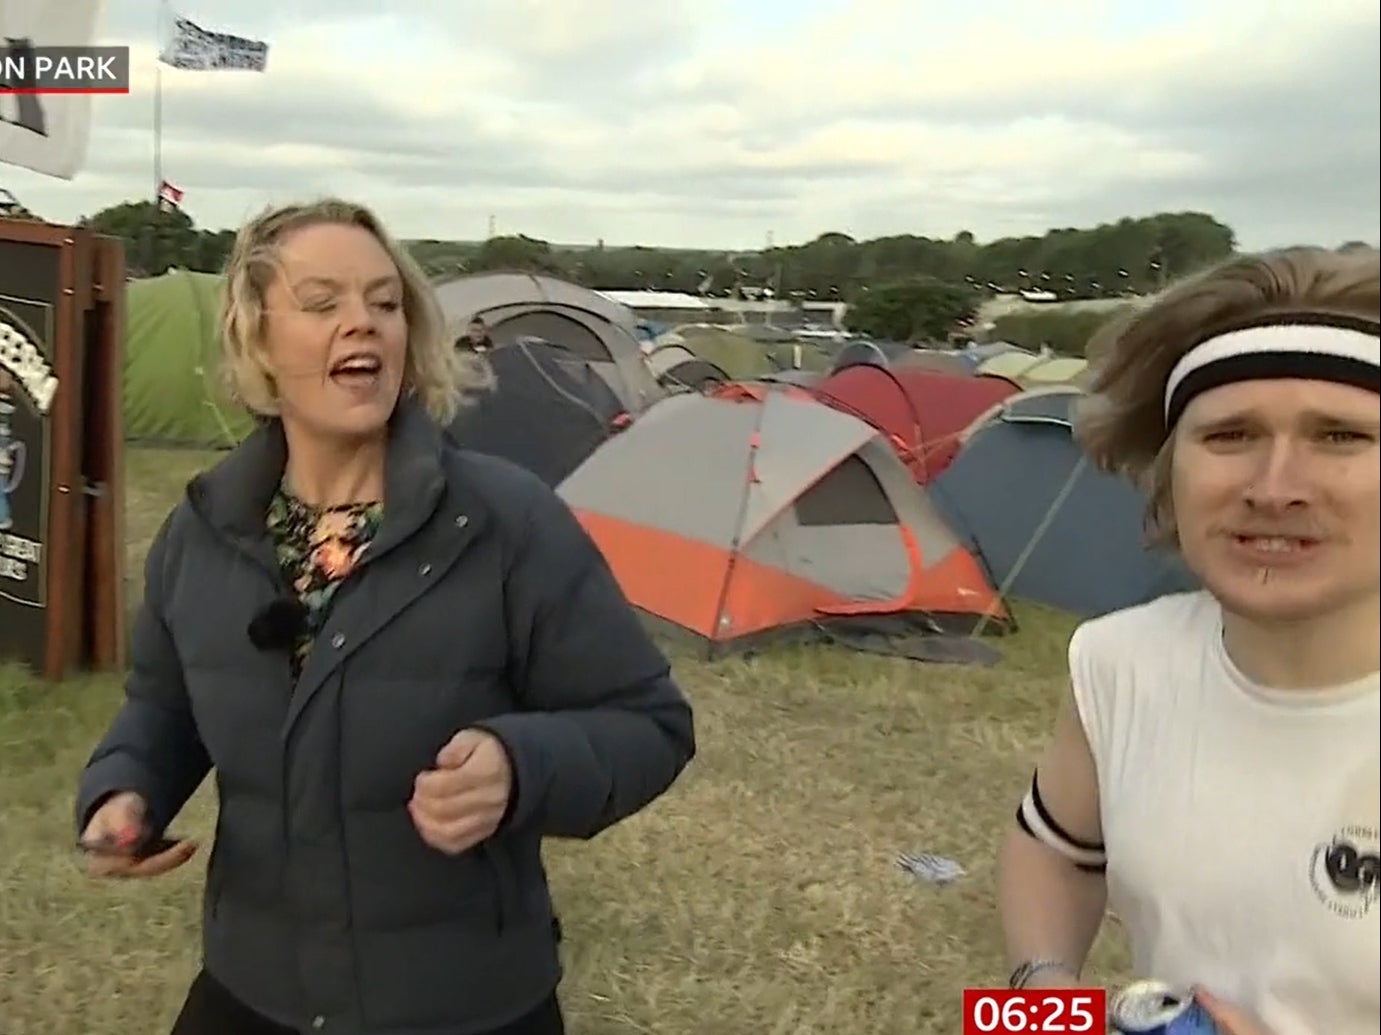 ‘BBC Breakfast’ broadcast is interrupted by a festivalgoer